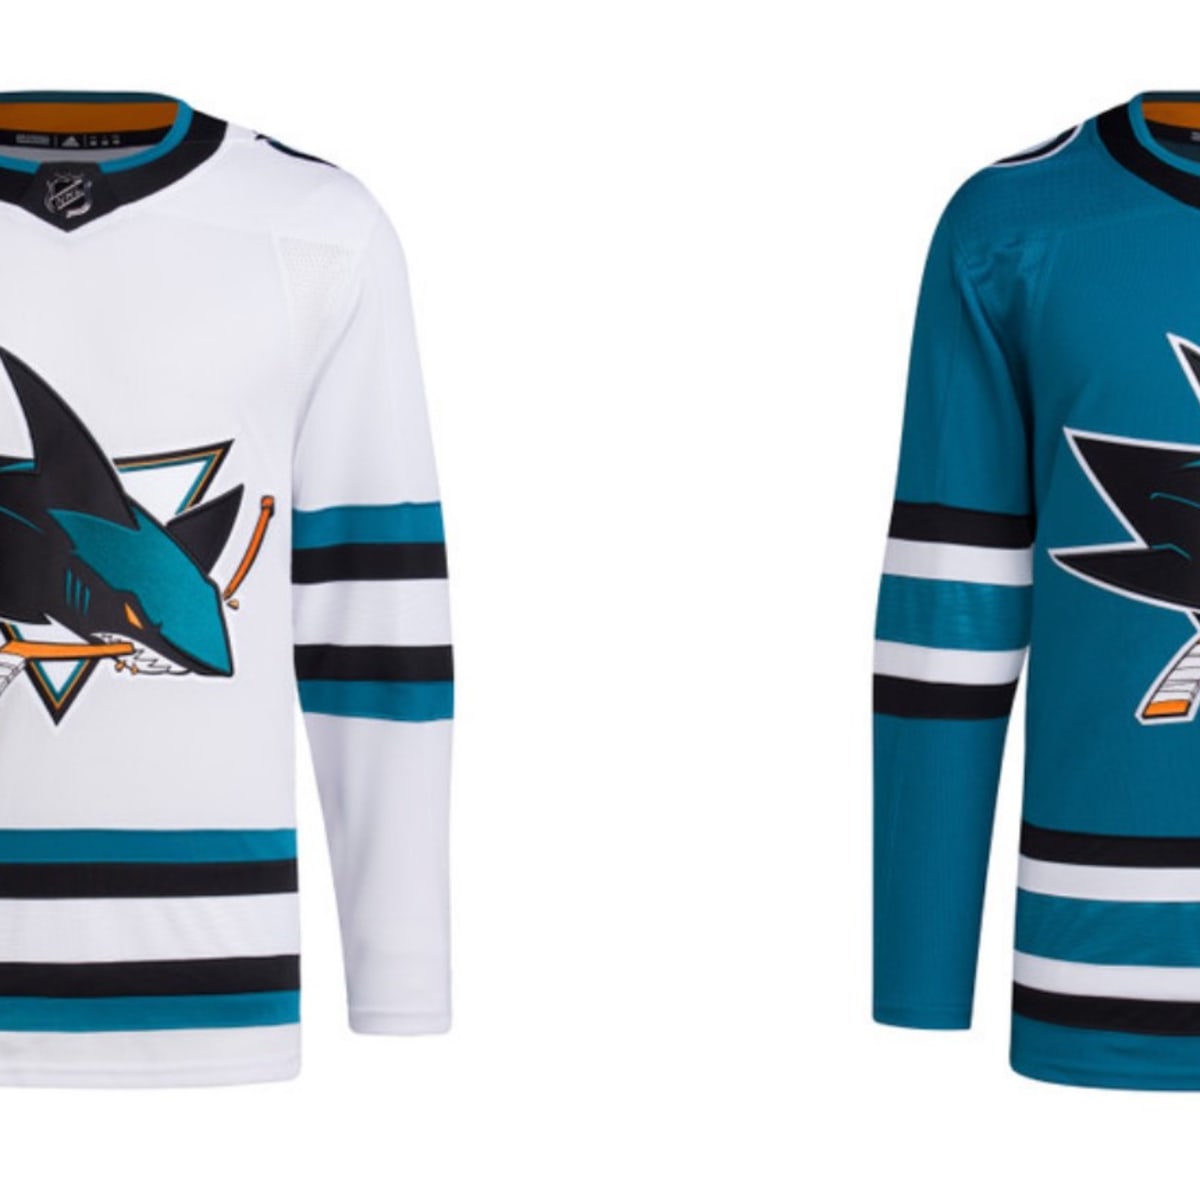 San Jose Sharks - Just in case you needed another reason to go shopping,  the annual Sharks Equipment Sale is BACK! Upgrade your hockey gear or add a  game-used jersey to your